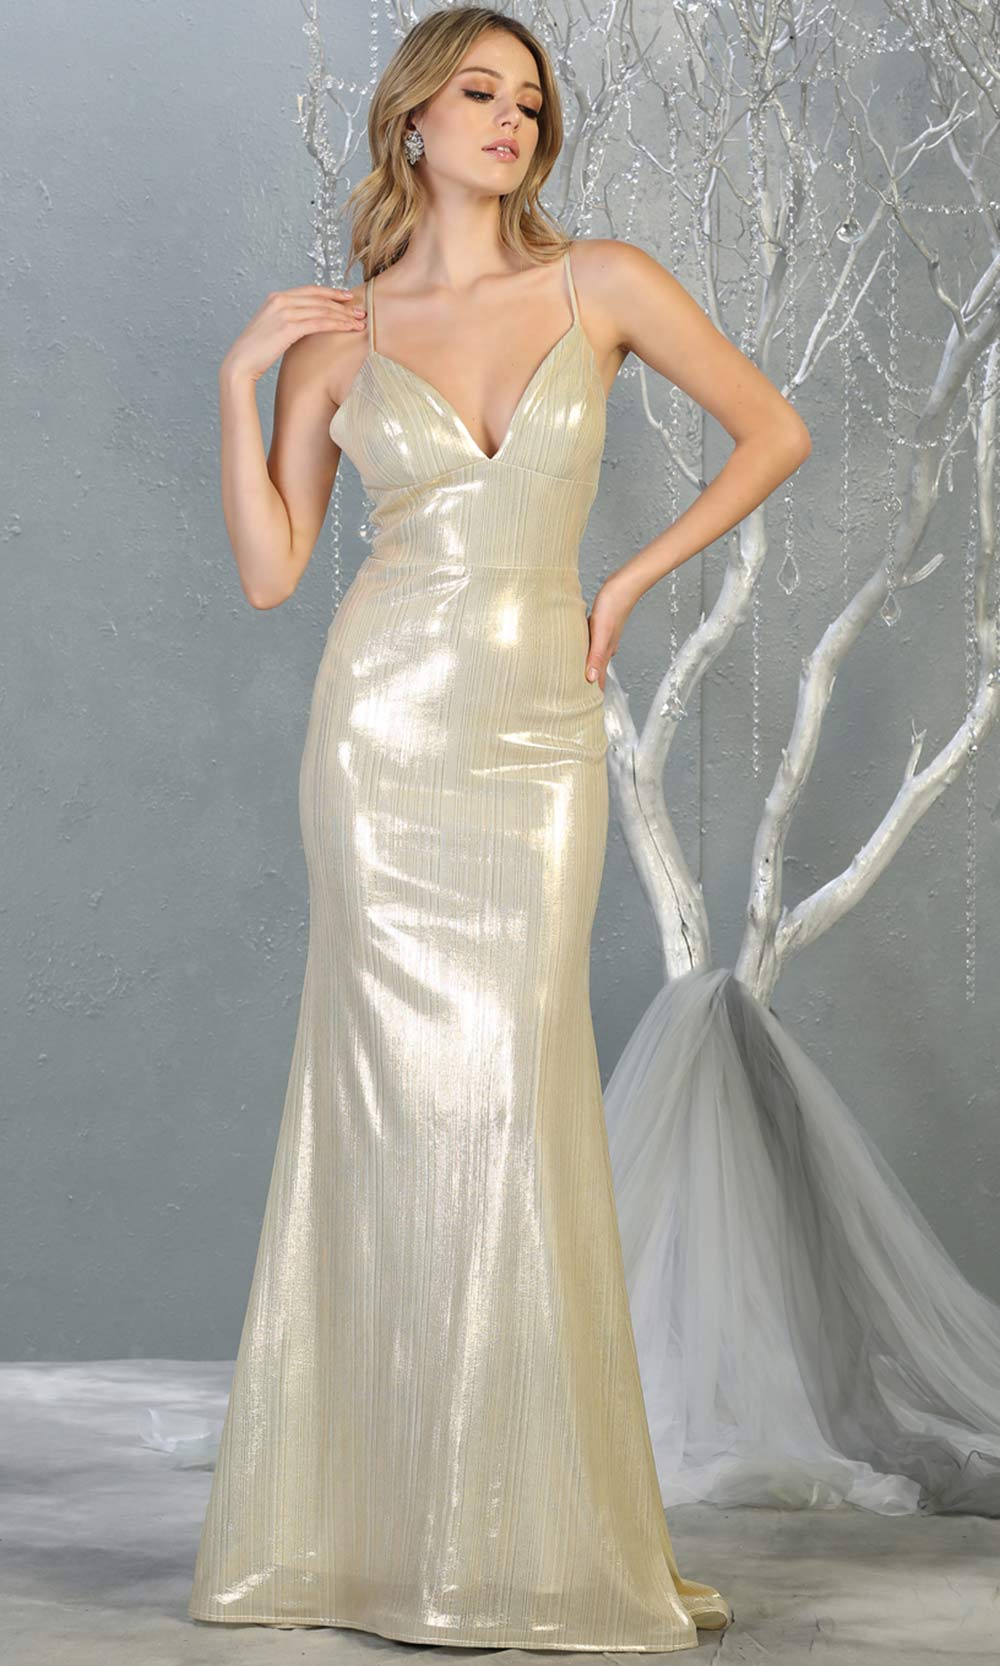 Mayqueen MQ1827 long gold sexy fitted shiny prom mermaid dress w/open back. Full length gold gown is perfect for enagagement/e-shoot dress, wedding reception dress, indowestern gown, formal evening party dress, prom. Plus sizes avail.jpg